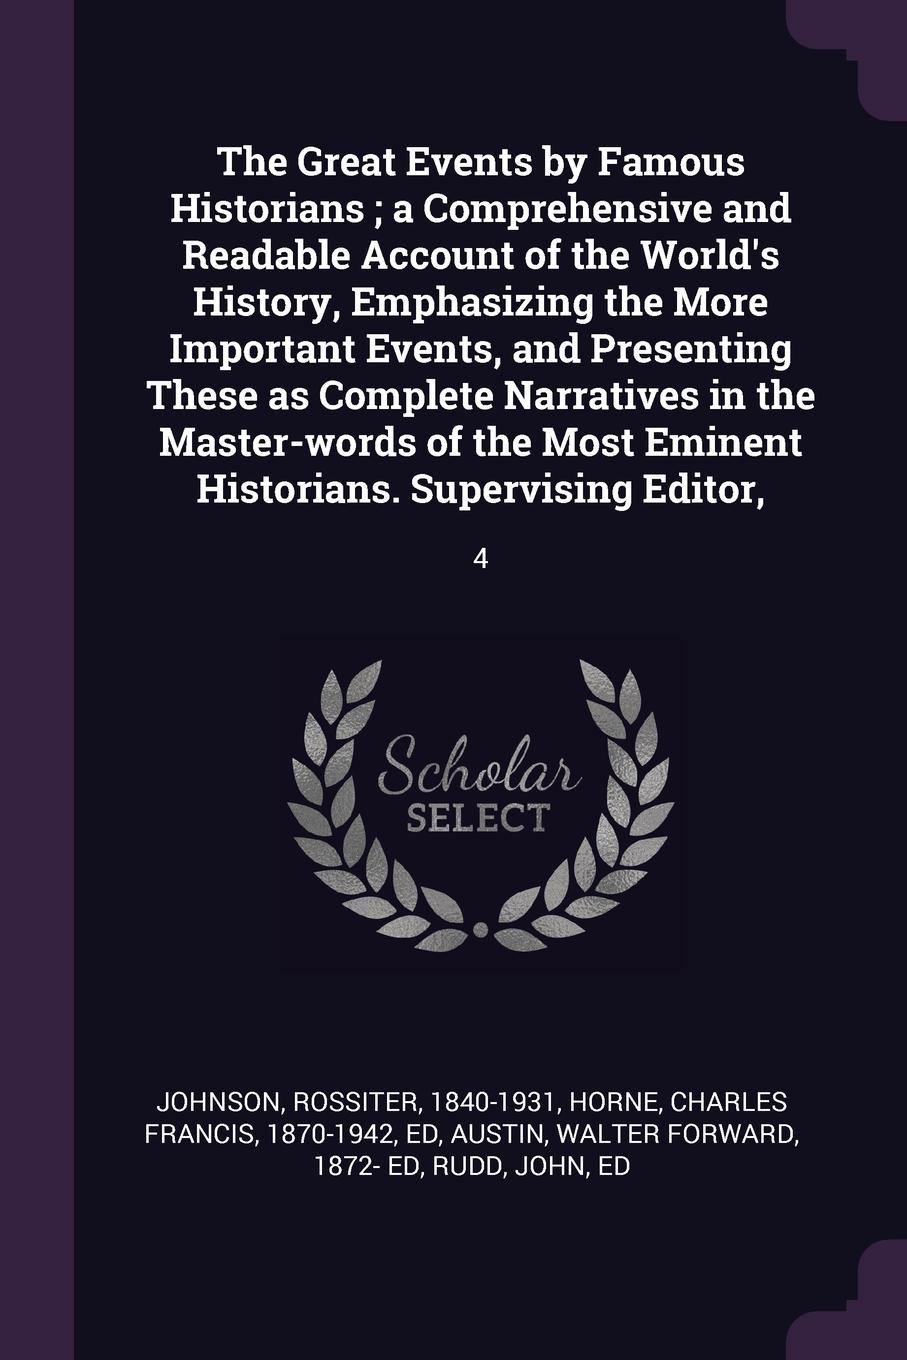 The Great Events by Famous Historians ; a Comprehensive and Readable Account of the World`s History, Emphasizing the More Important Events, and Presenting These as Complete Narratives in the Master-words of the Most Eminent Historians. Supervising...